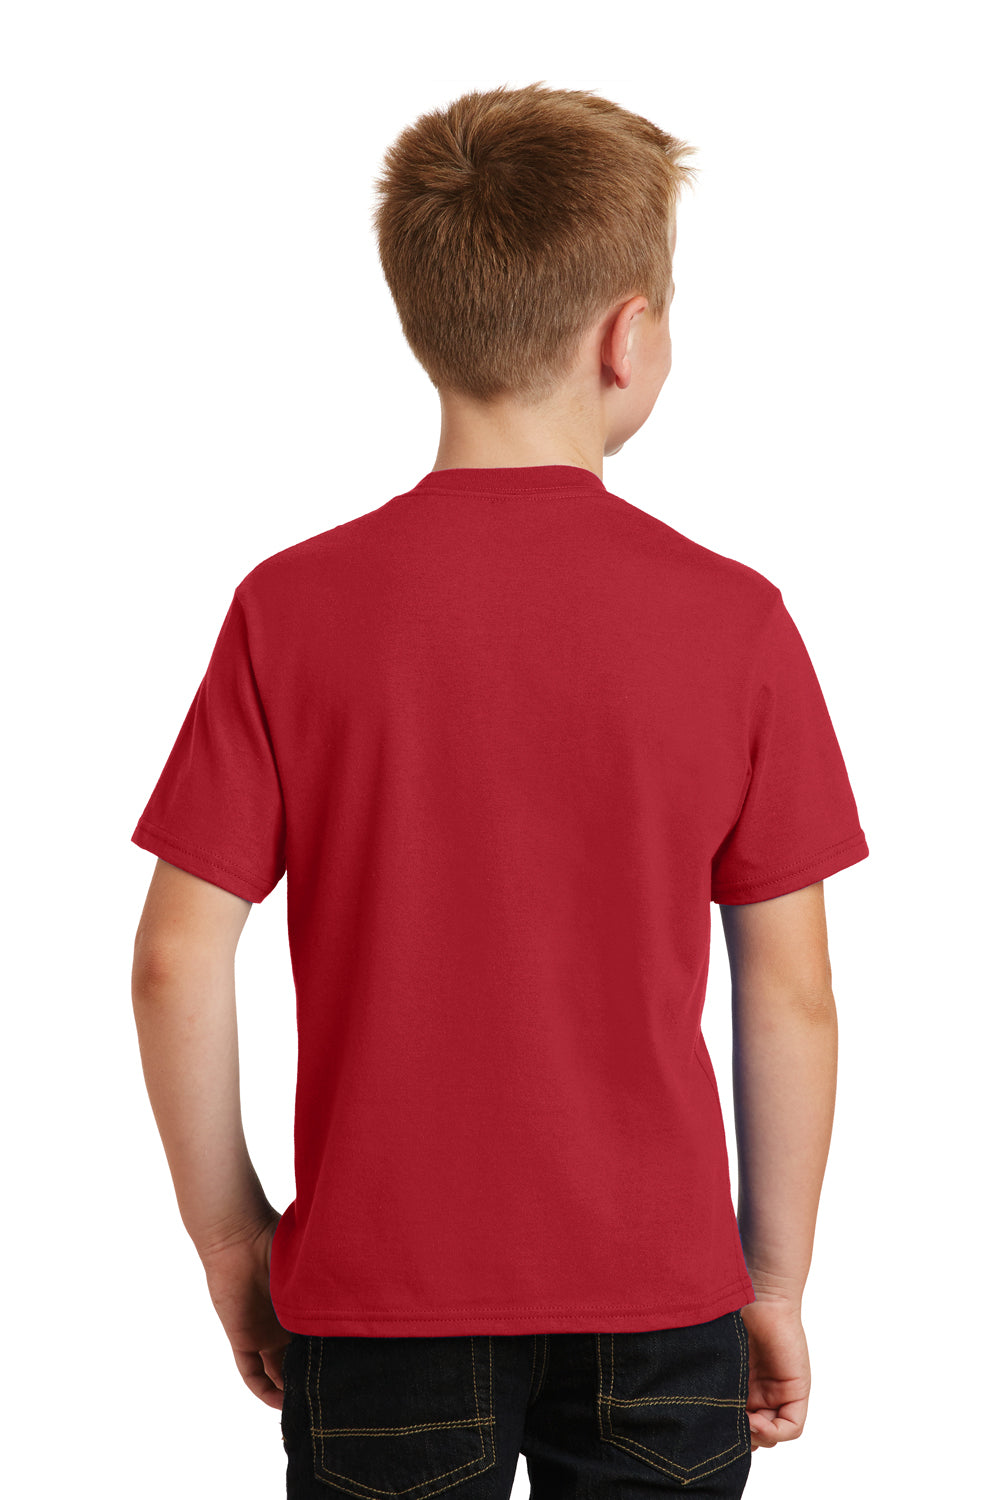 Port & Company PC450Y Youth Fan Favorite Short Sleeve Crewneck T-Shirt Cardinal Red Back